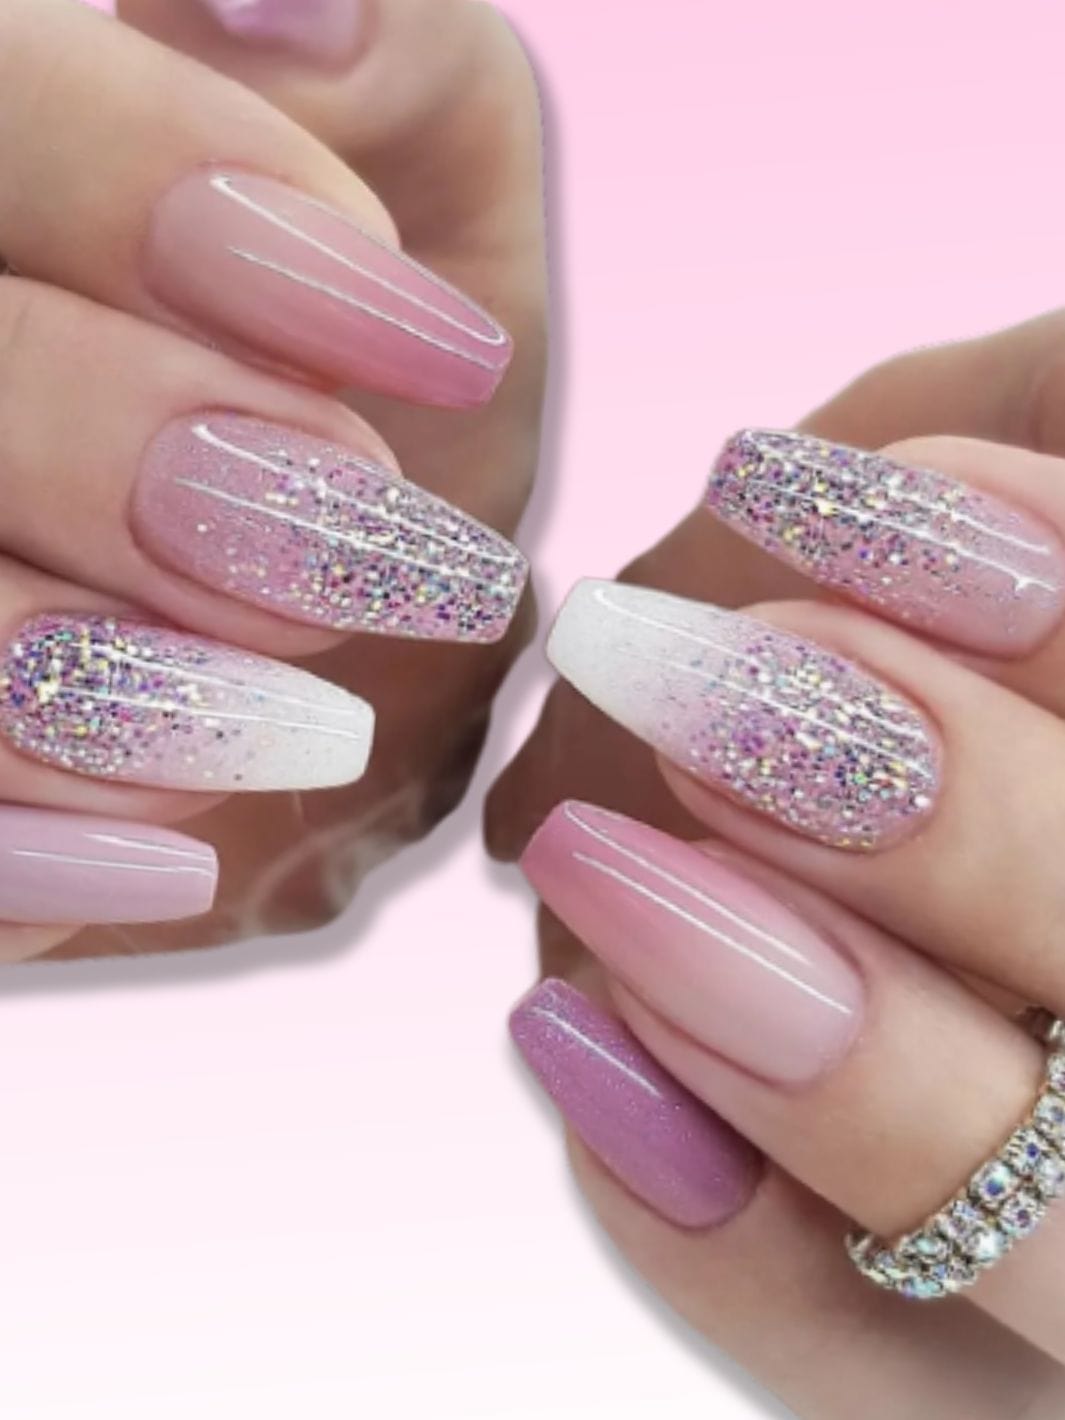 Faux ongles de mariage Nail Chic